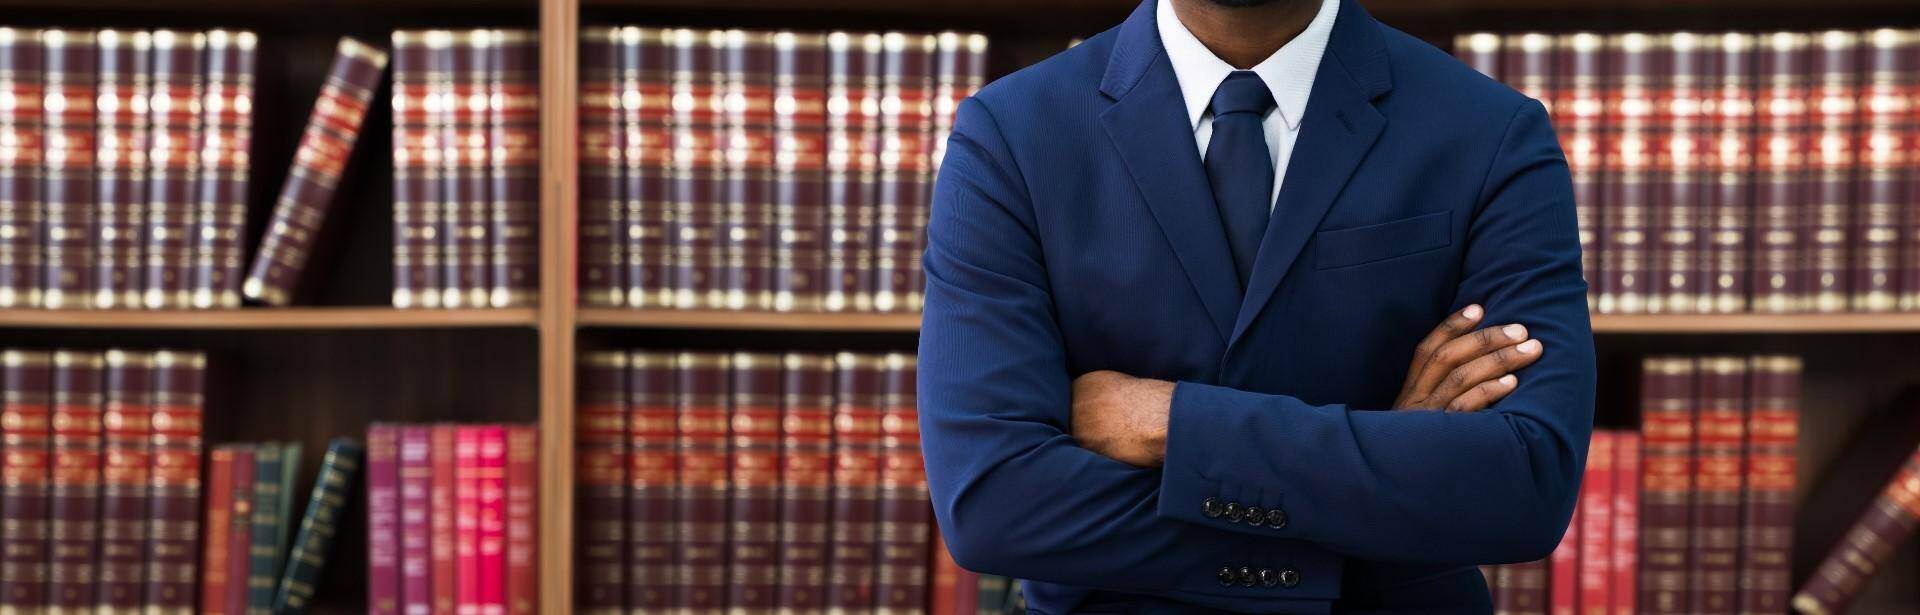 A black lawyer standing in front of a bookshelf of law book in Martinez, Georgia